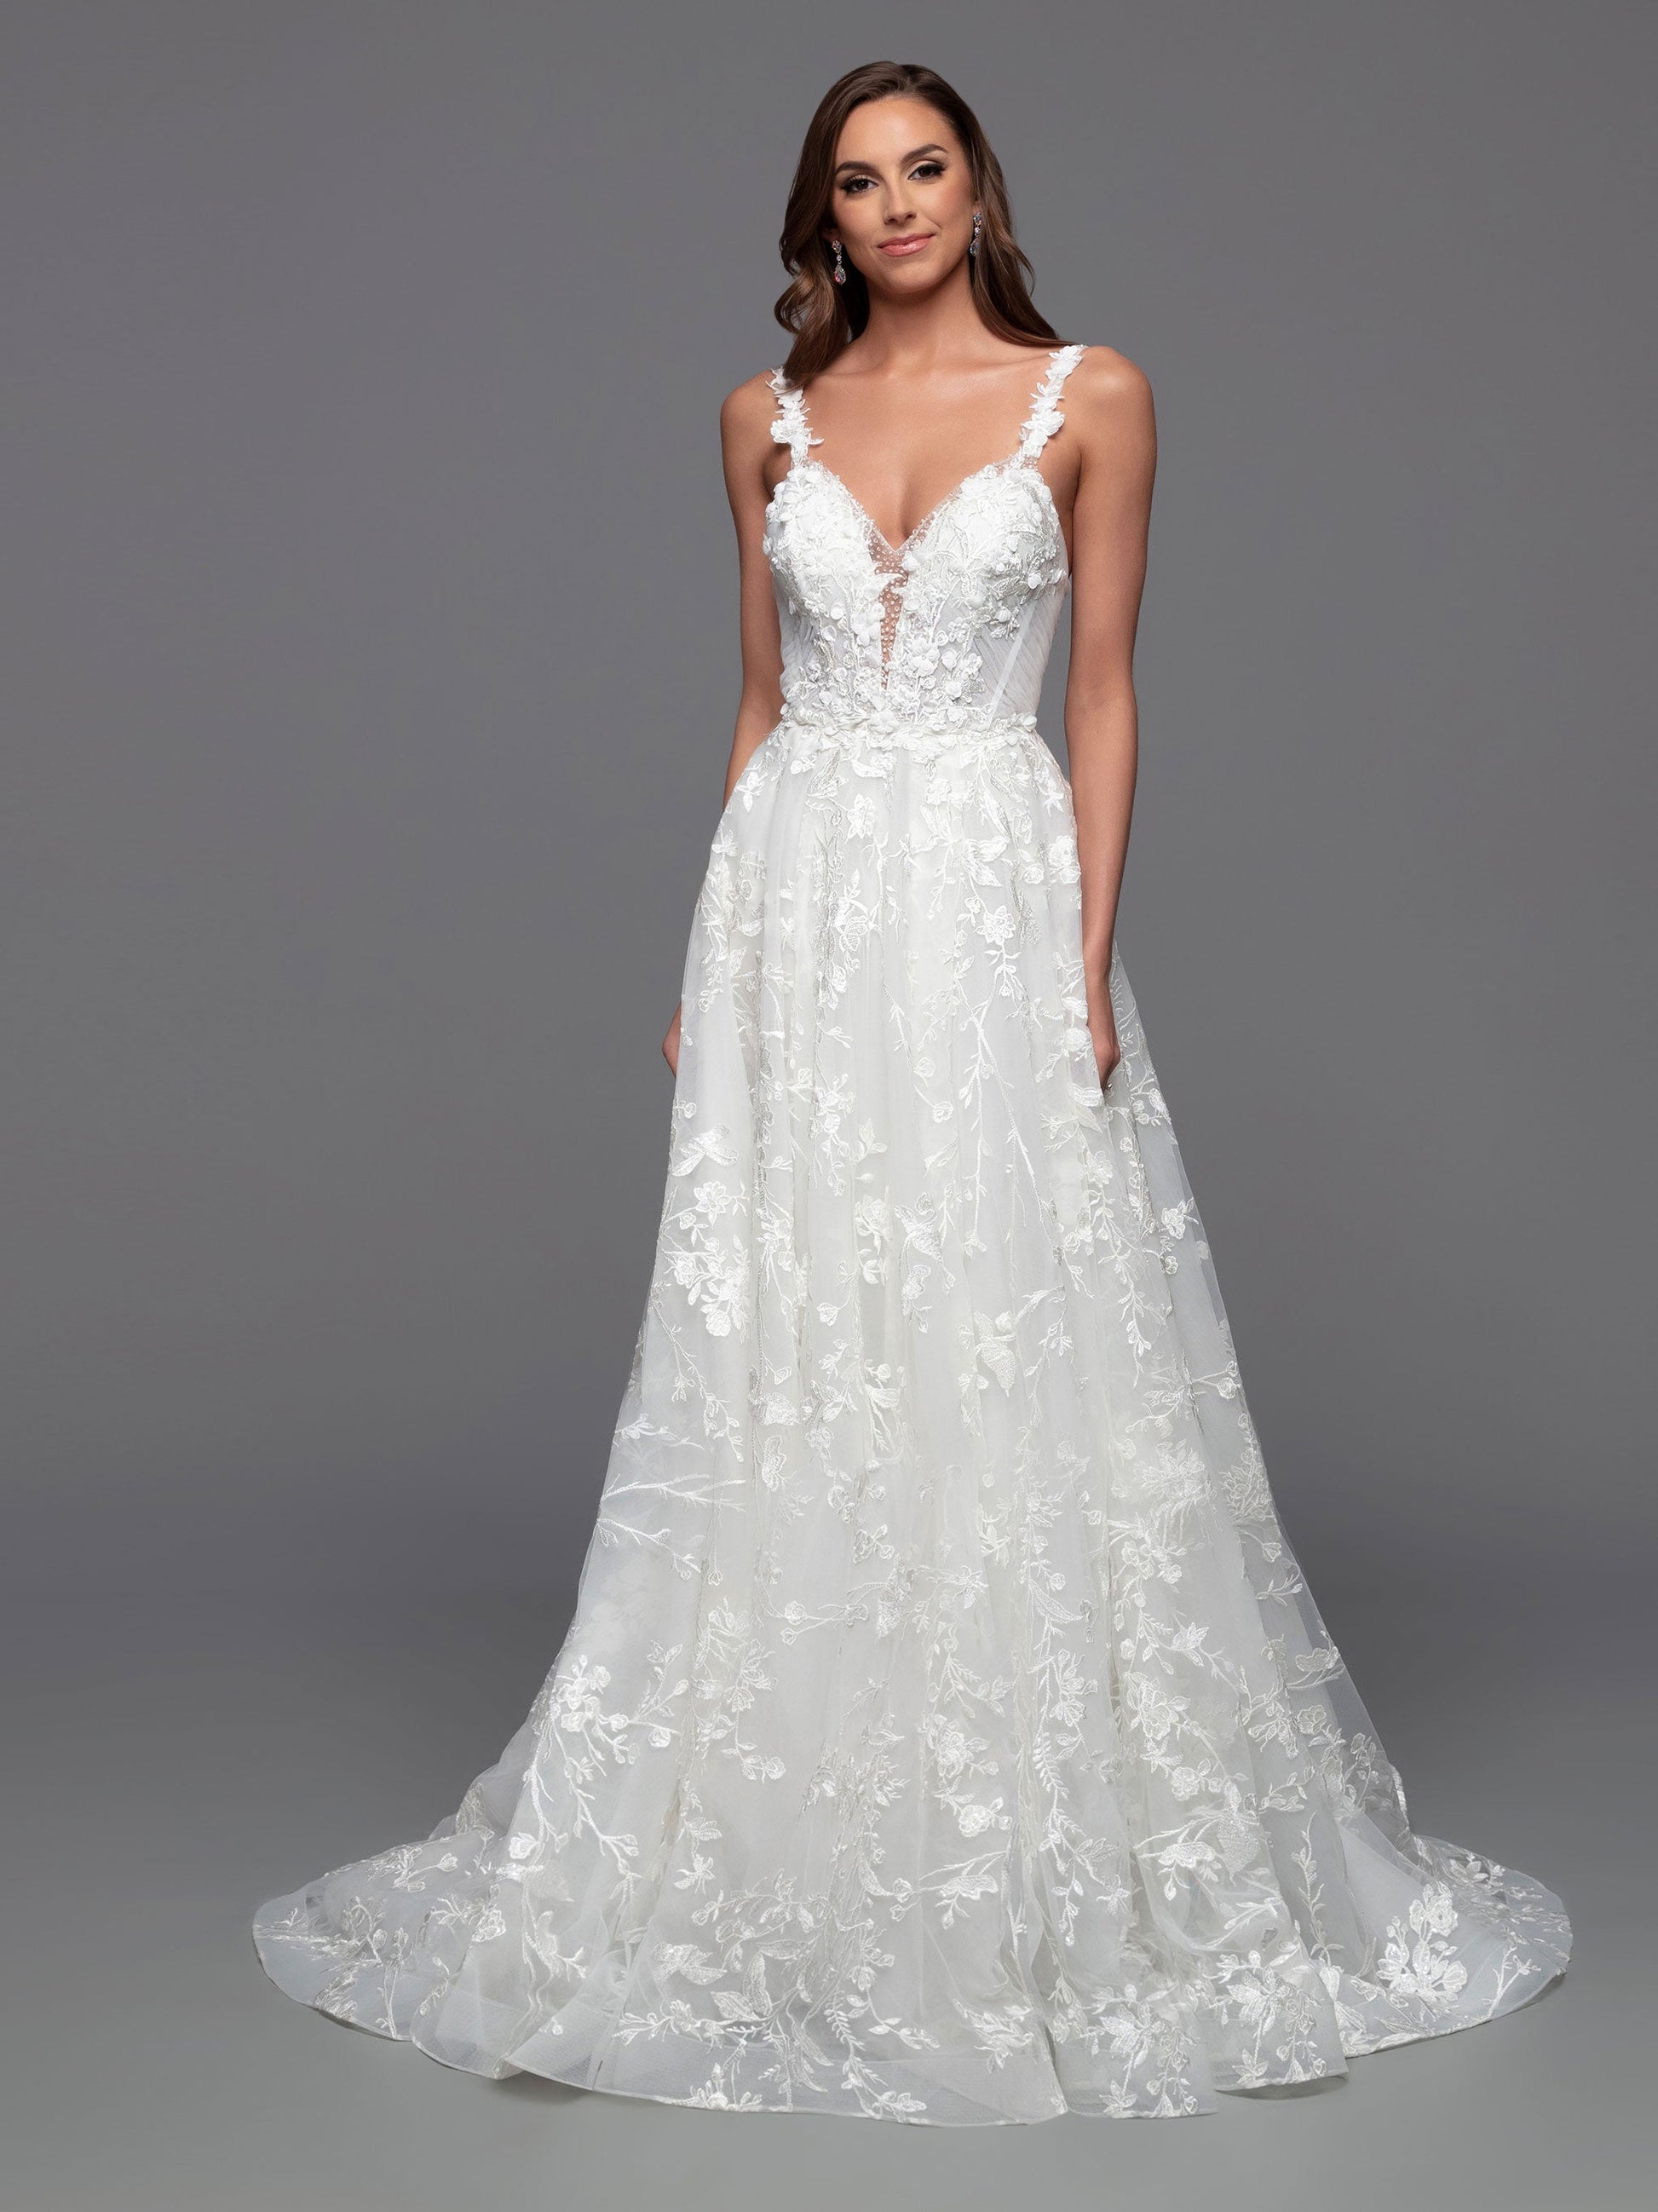 Look stunning on your special day in this Davinci Bridal 50806 A Line Lace Cape Wedding Dress. Constructed with a sheer crystal plunging neckline and 3D floral embroidery on the front and back bodice, this gown provides an exquisite look with gathered skirt and chapel train. Plus, you can customize your look and stand out in photos with the addition of the detachable veil wings.  Sizes: 2-20  Colors: Ivory